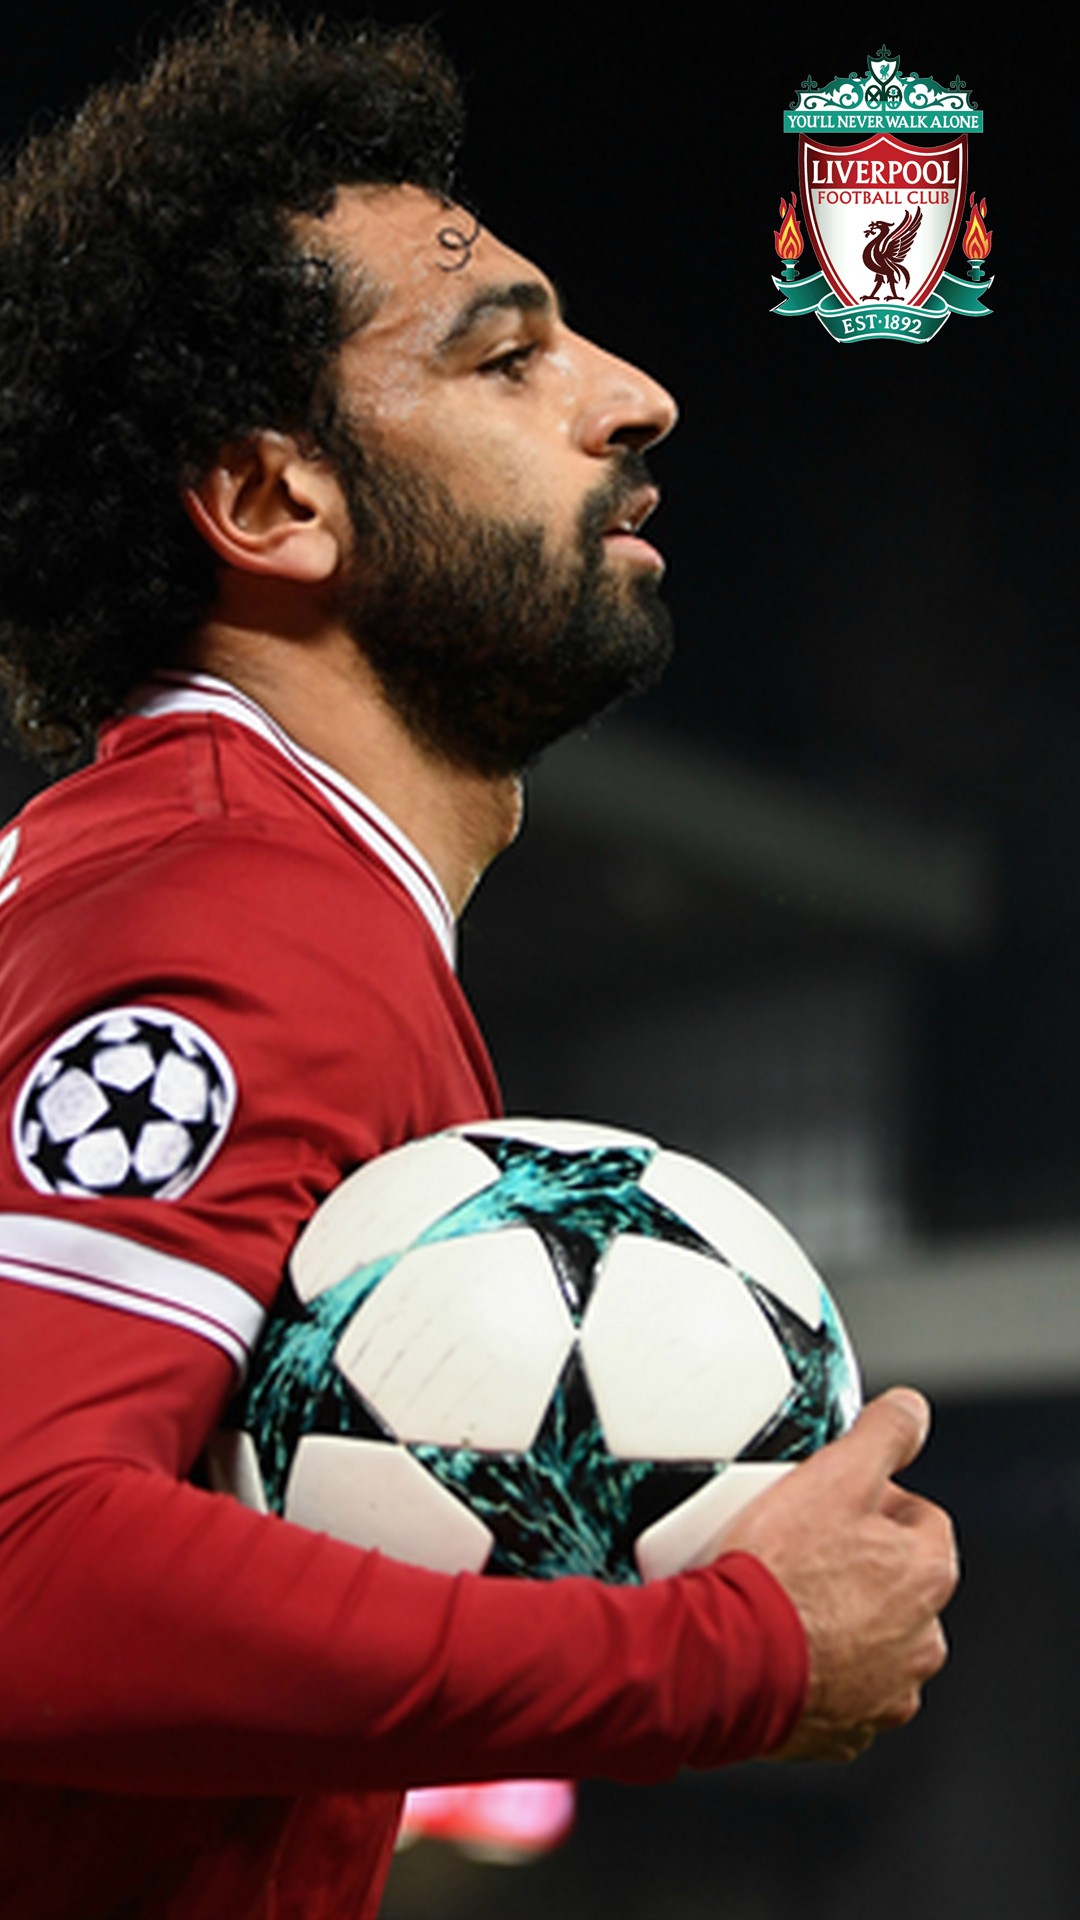 Wallpaper Android Salah Liverpool with resolution 1080X1920 pixel. You can make this wallpaper for your Android backgrounds, Tablet, Smartphones Screensavers and Mobile Phone Lock Screen